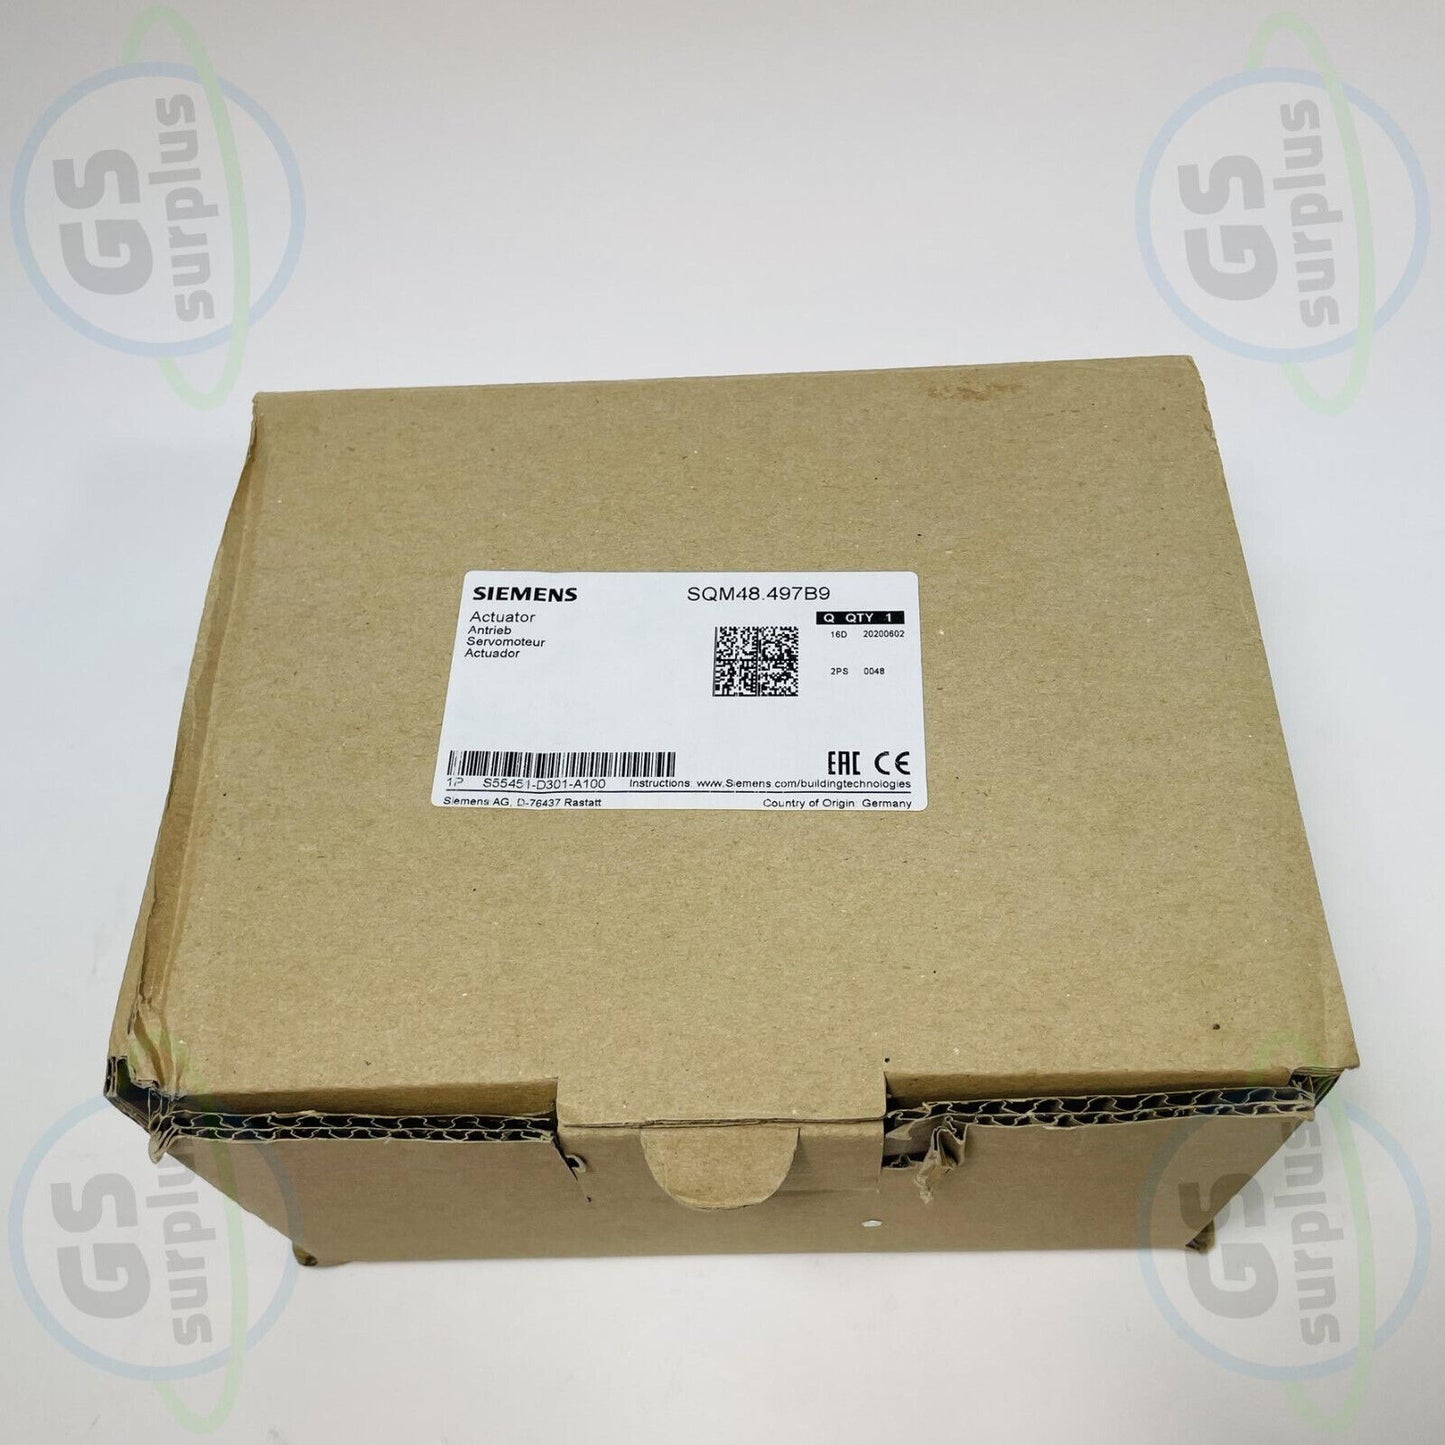 New Siemens SQM48.497B9 Combustion Actuator